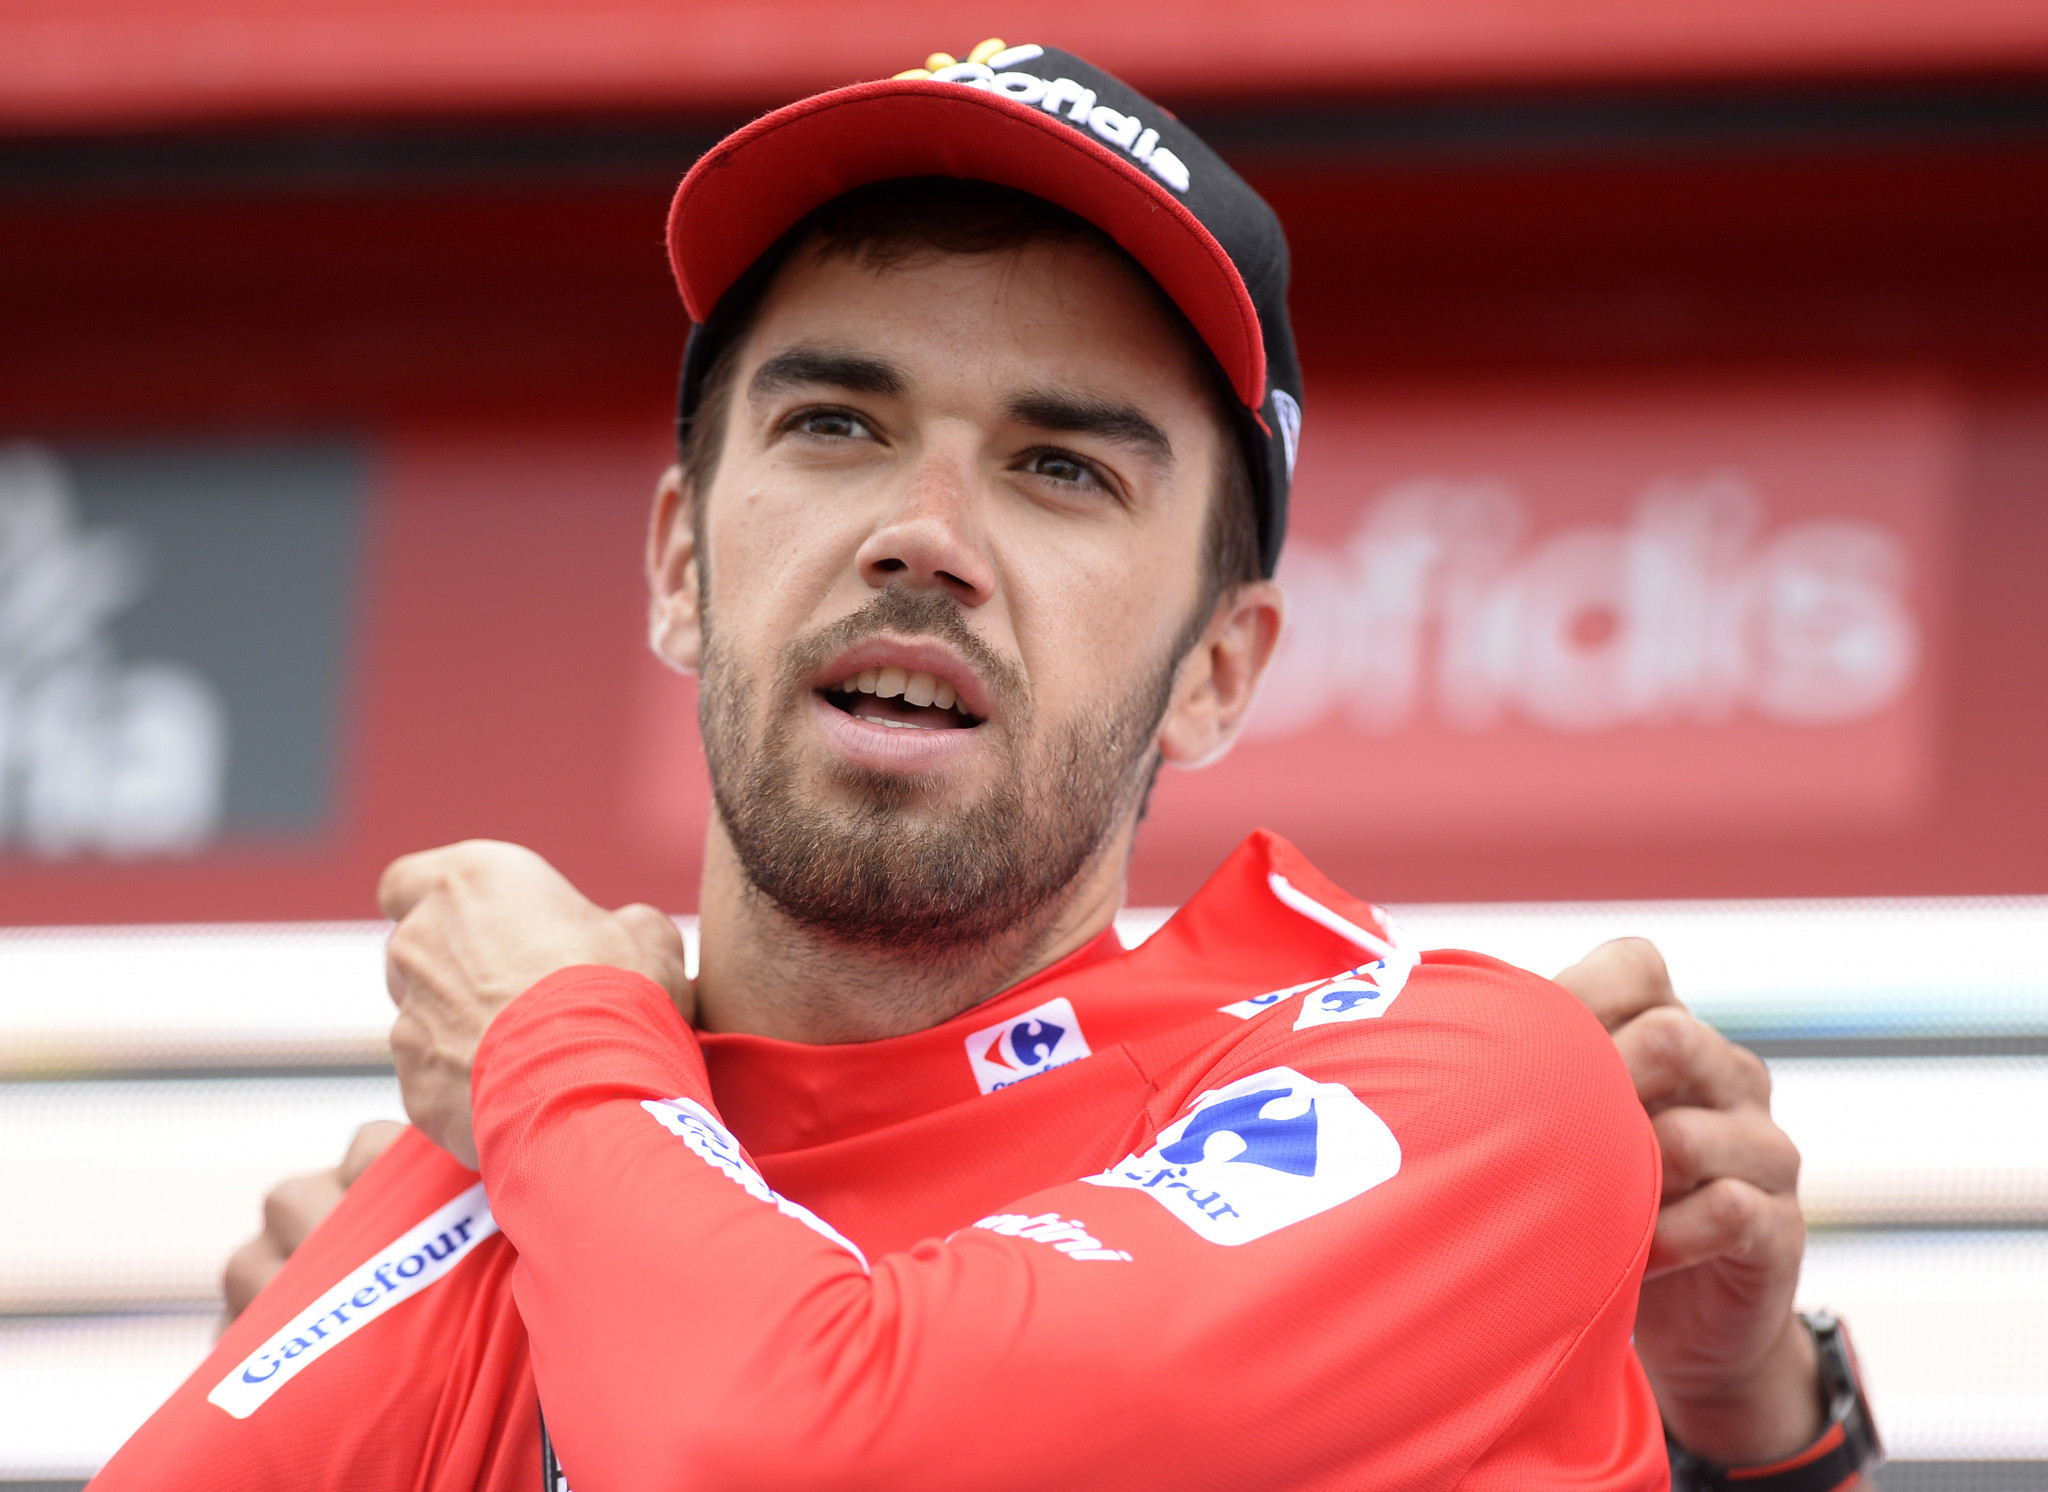 Geniez wins stage 12 as Herrada moves into overall lead at Vuelta a España